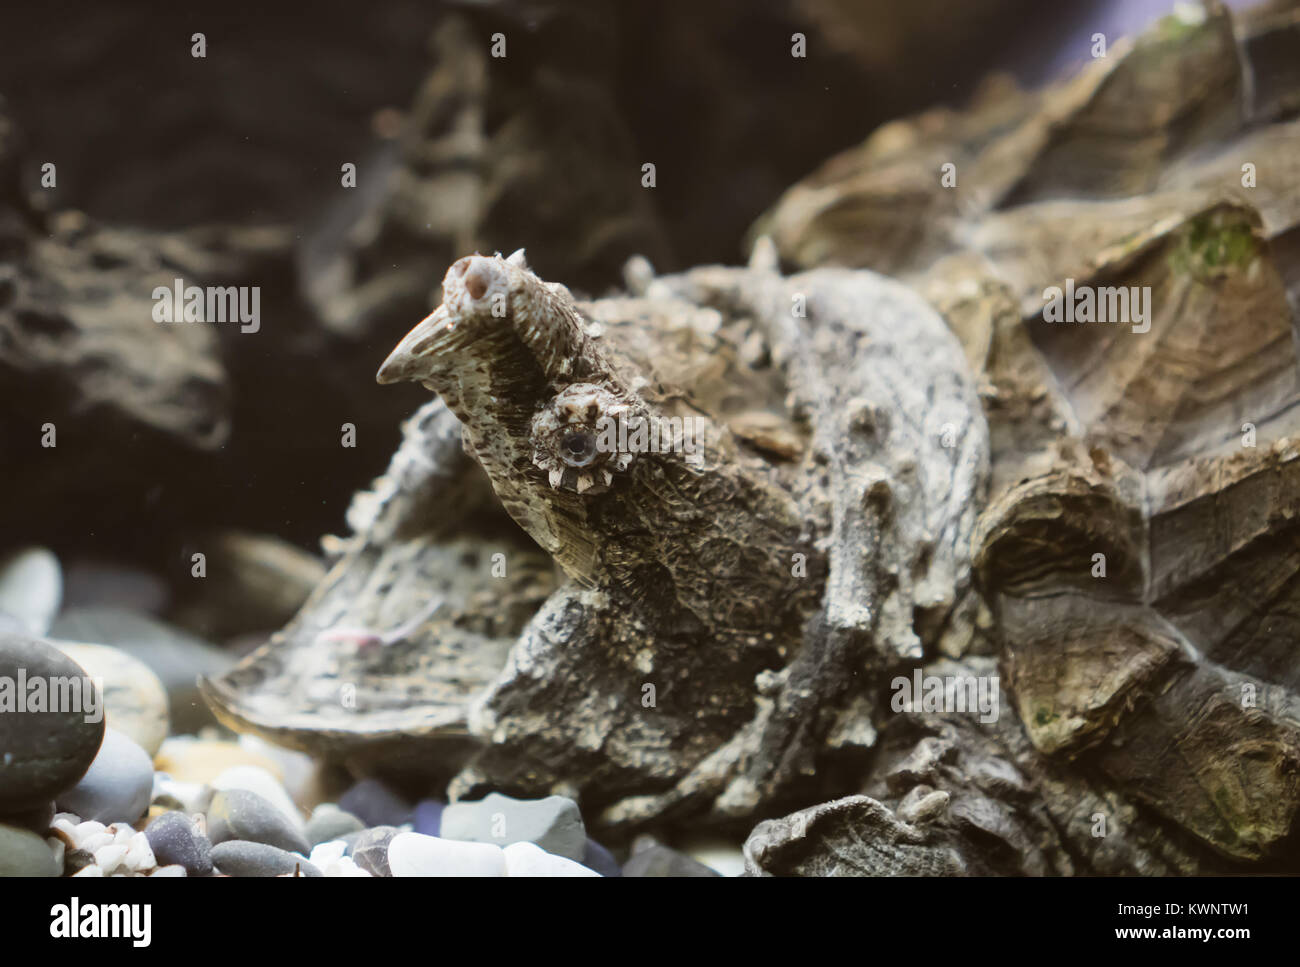 Alligator snapping turtle in the zoo. Macrochelys temminckii. Stock Photo